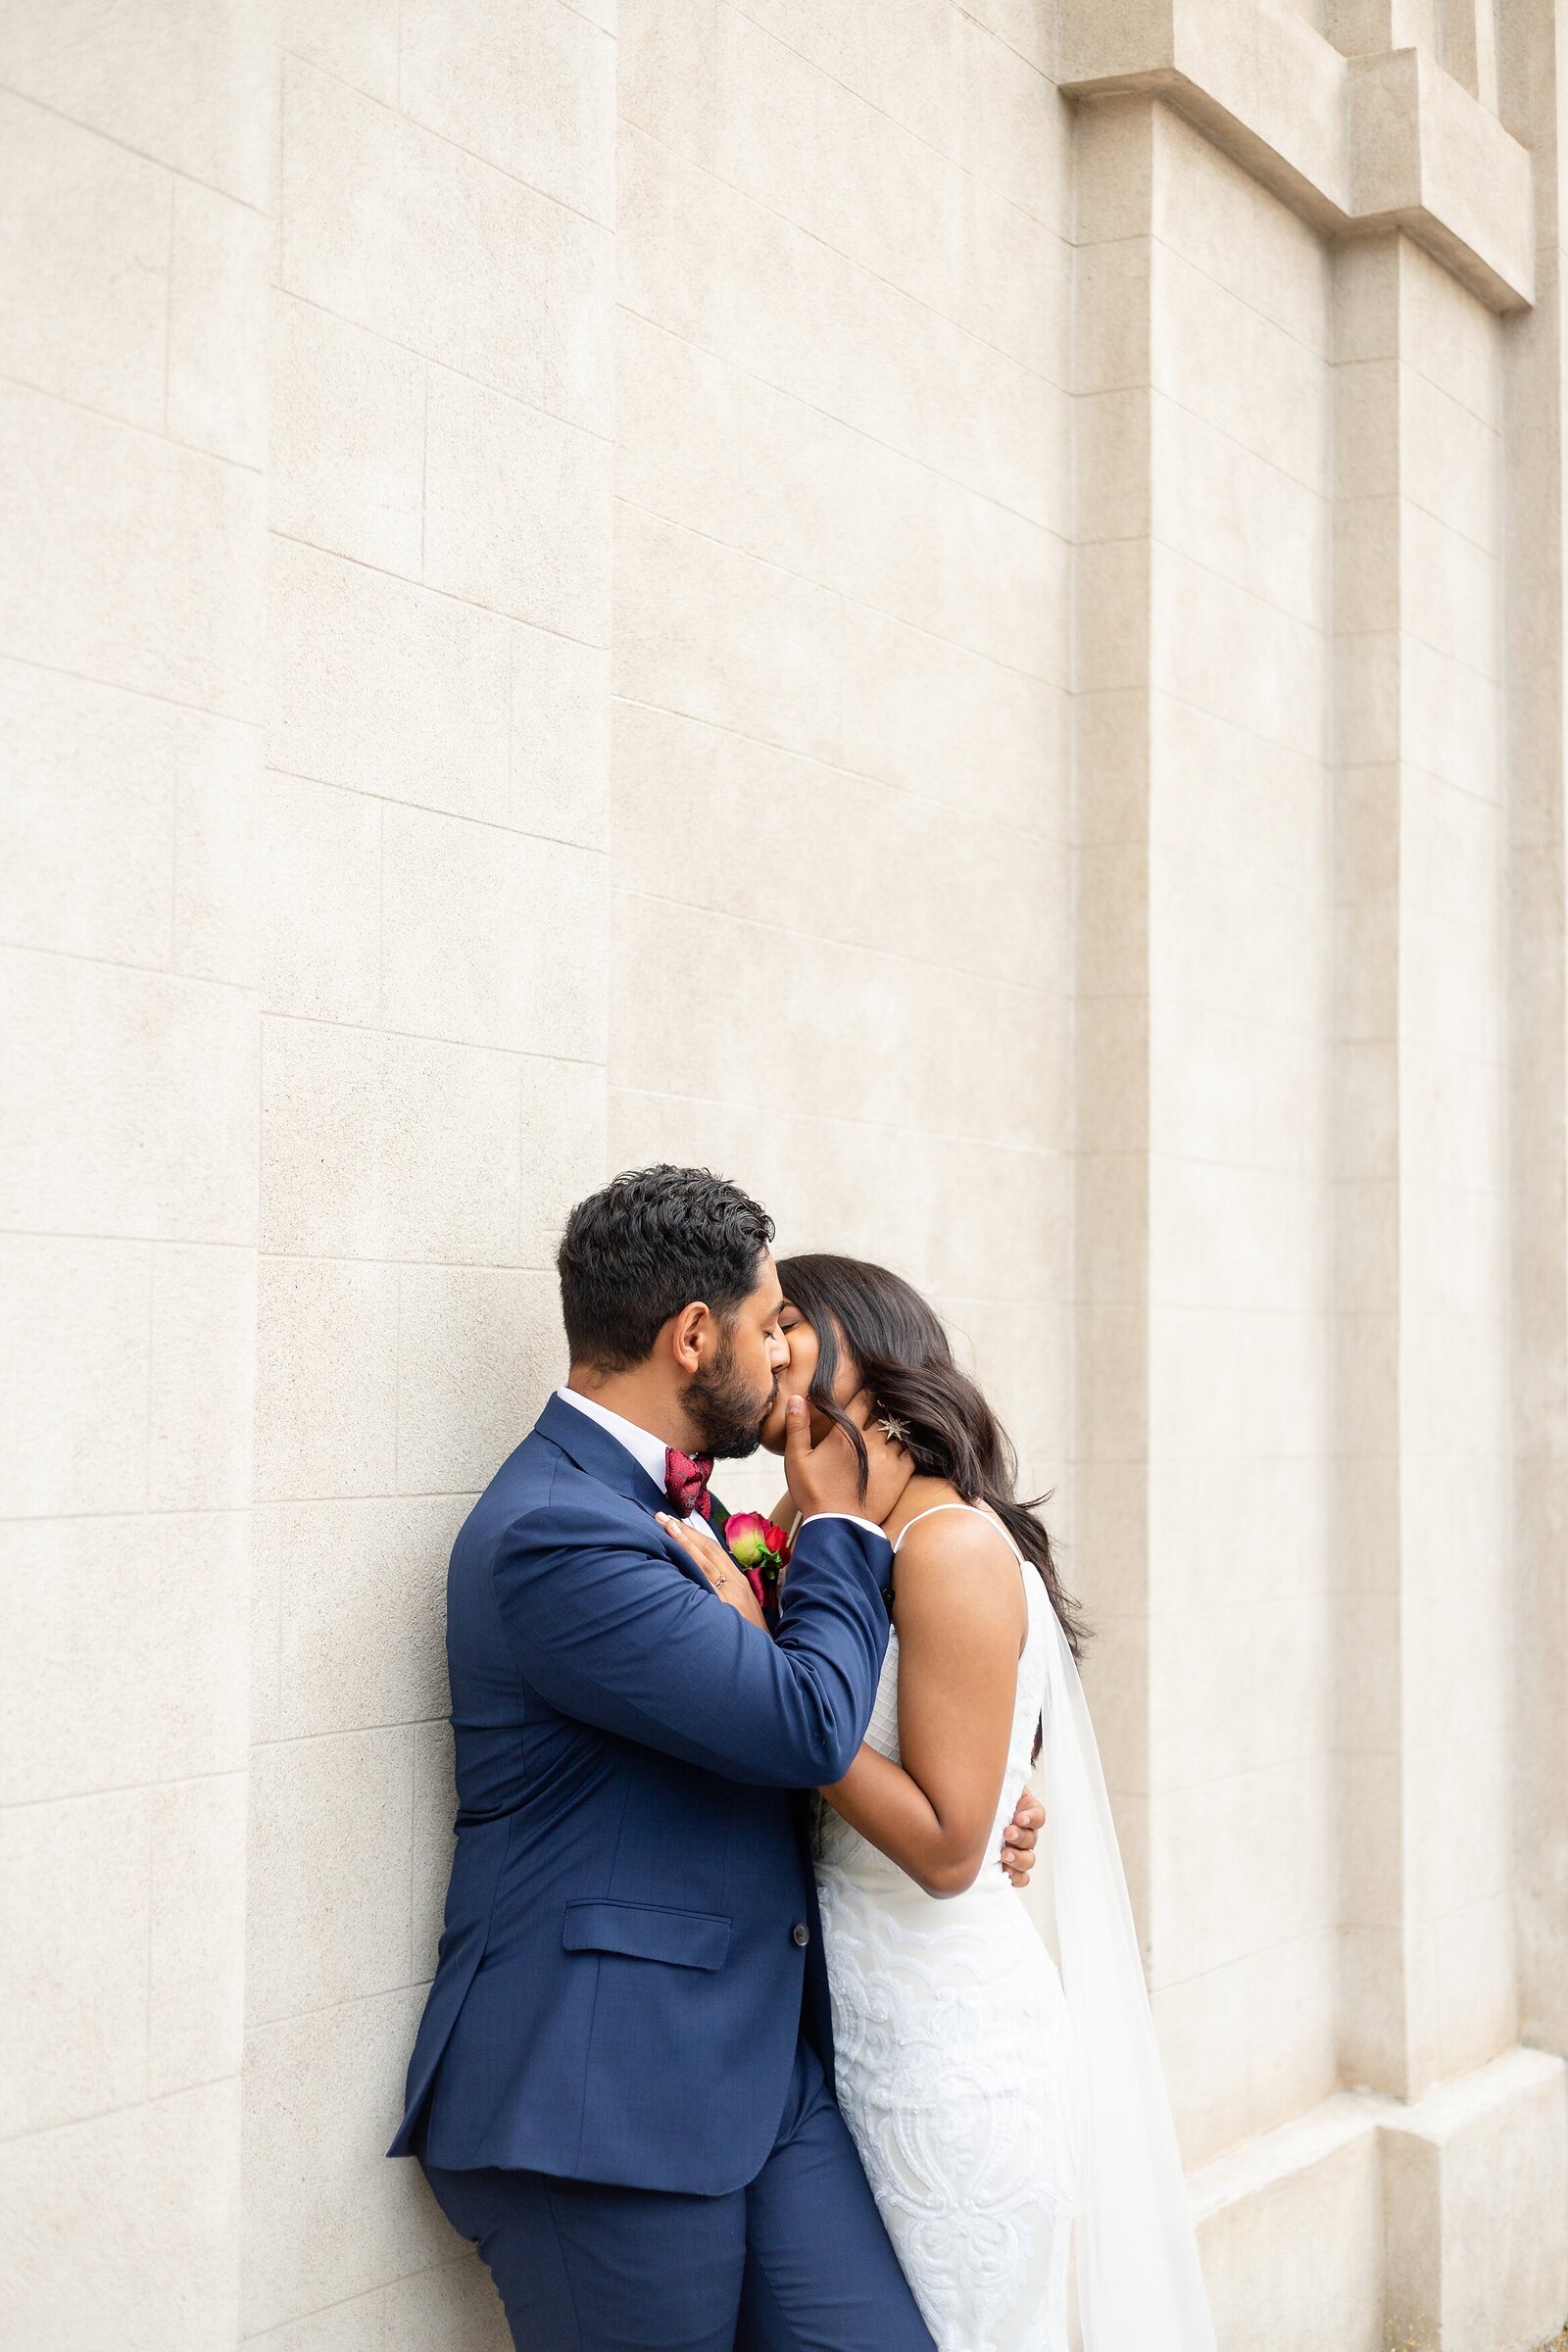 Newlyweds-share-a-kiss-at-dundurn-castle-in-hamilton-during-their-anniversary